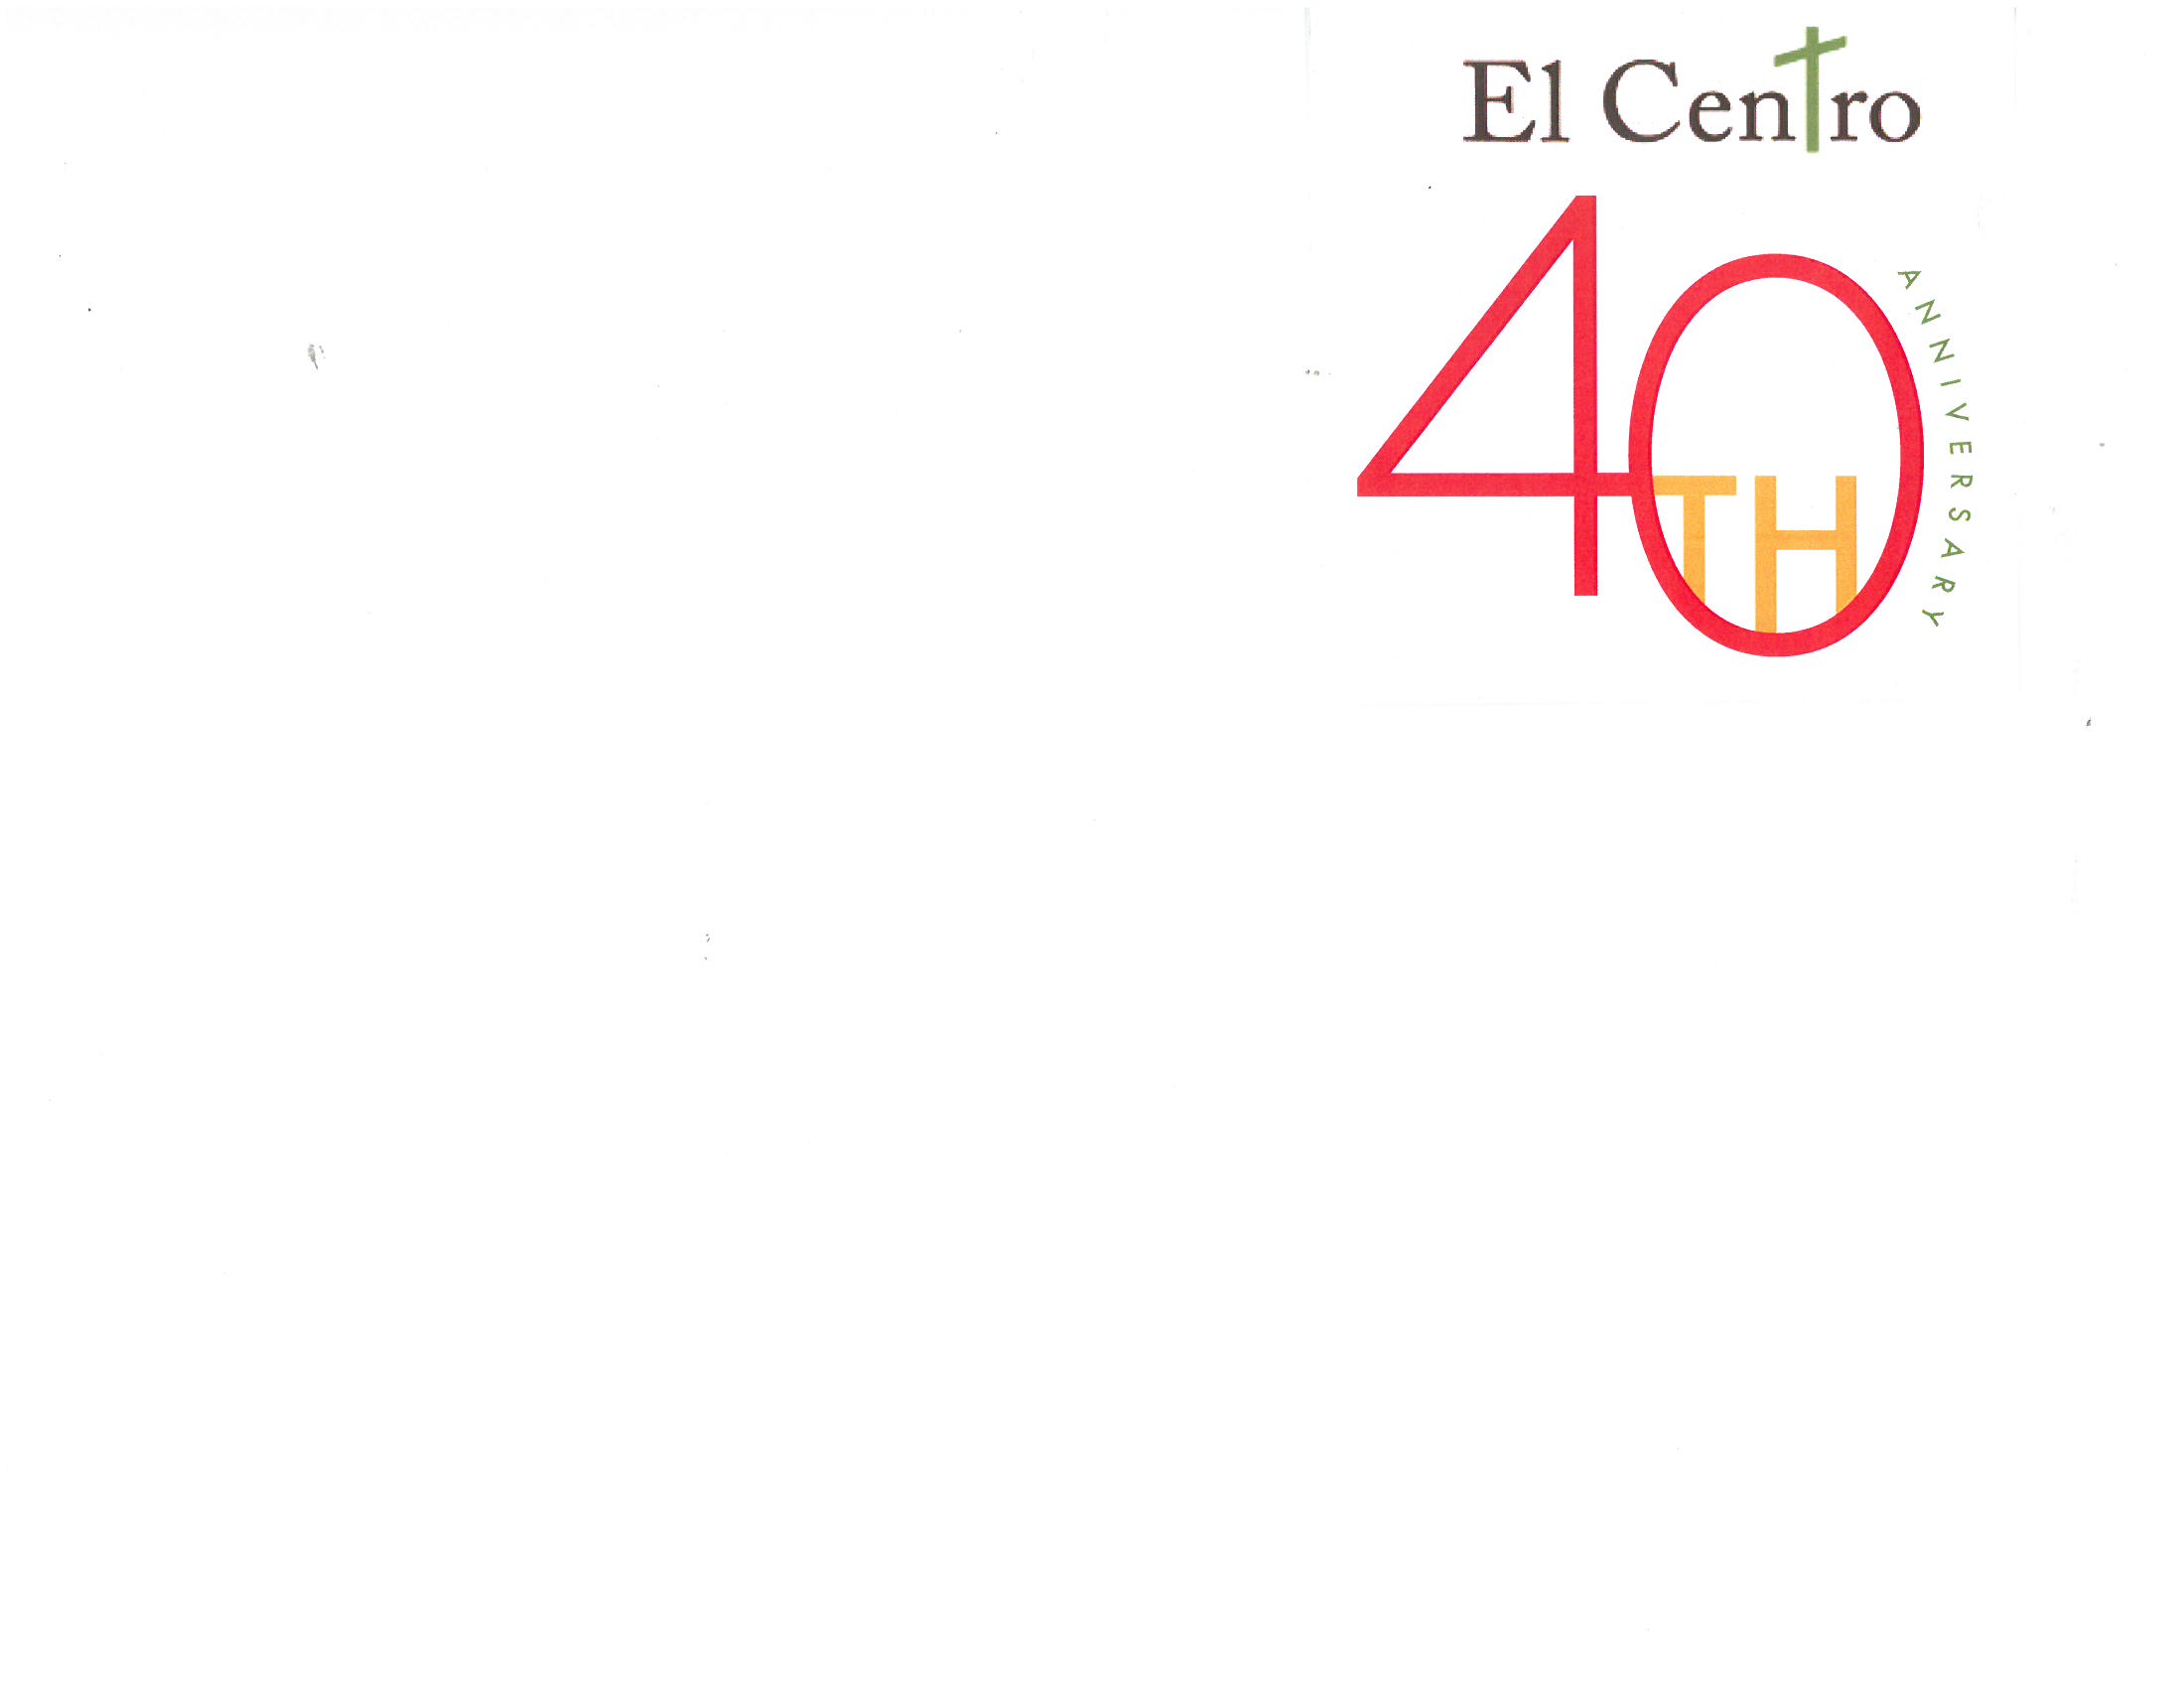 El Centro to Celebrate 40th Year with Gala